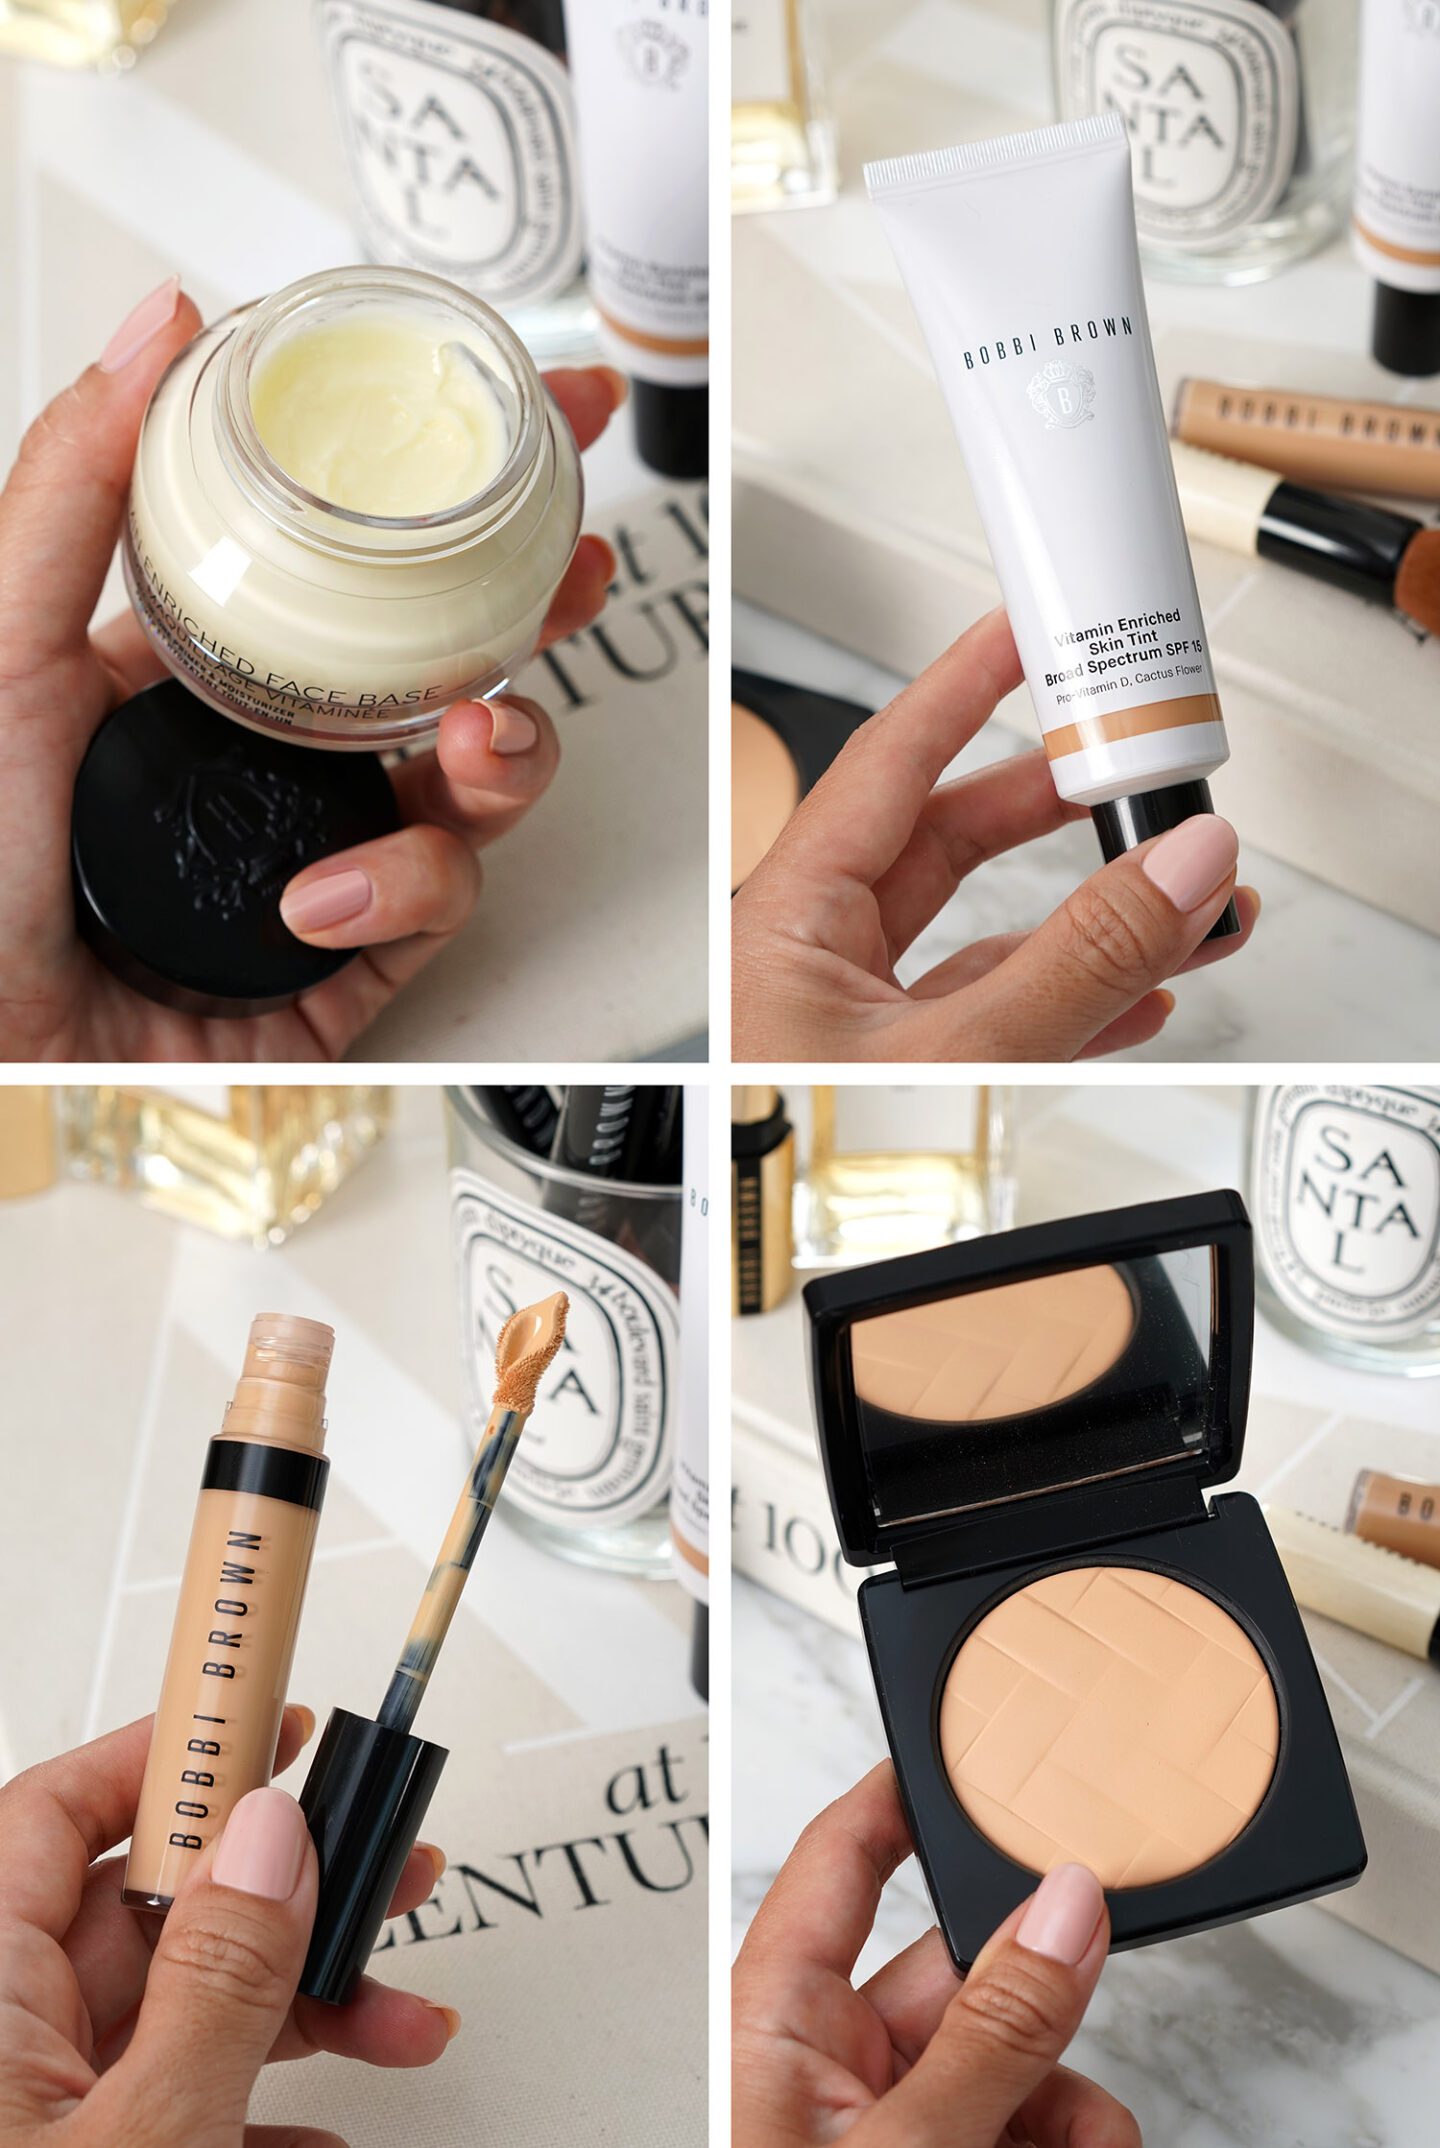 Bobbi Brown Vitamin Enriched Face Bace, Tint, Powder and Full Cover Concealer 